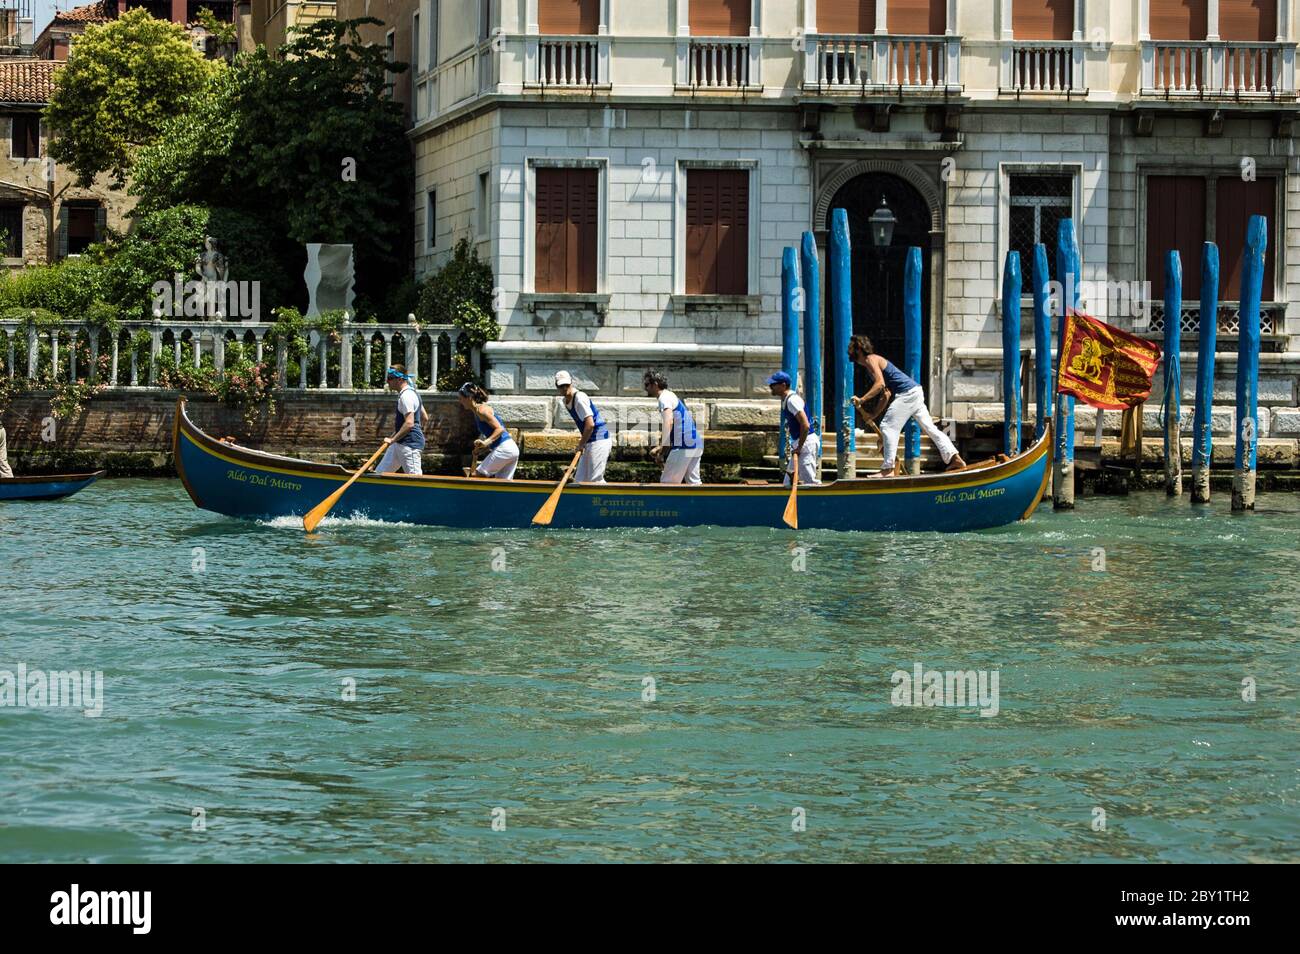 Venice, Italy - June 12, 2011:  Oarsmen racing along the Grand Canal in the Venice Vogalonga regatta on June 12 2011. Over a thousand boats take part Stock Photo